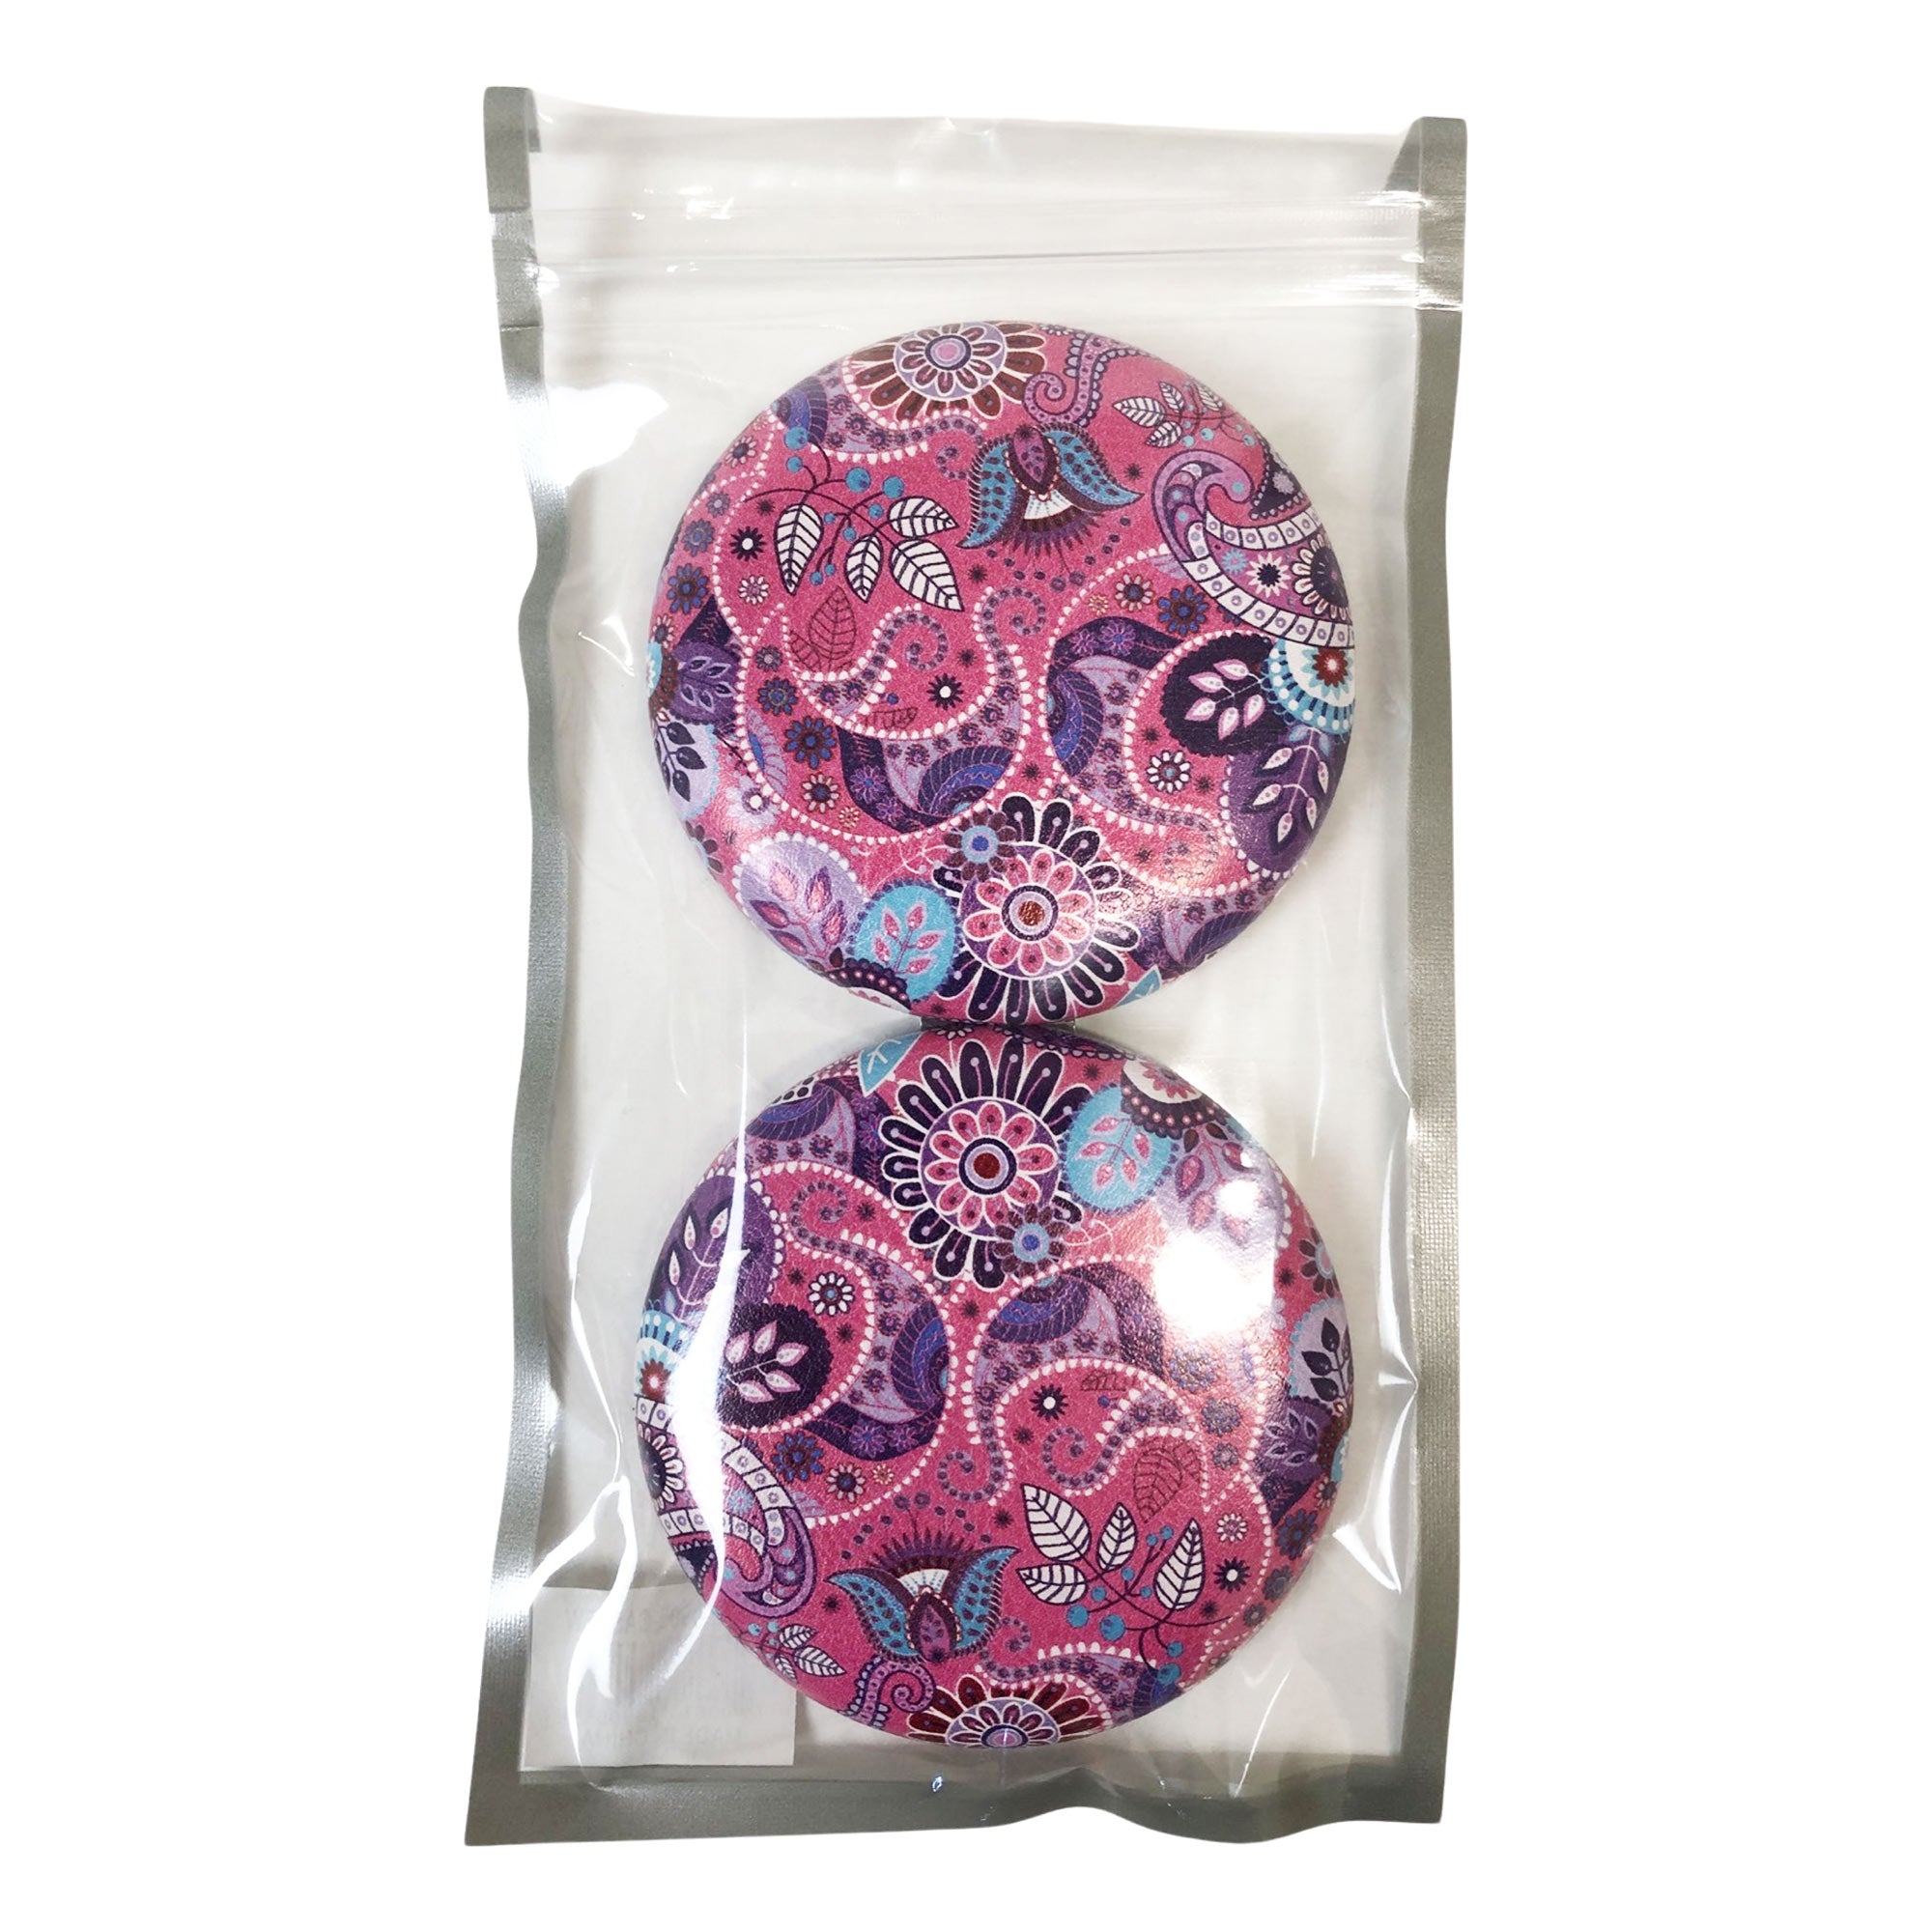 CLEARANCE COSMETIC MIRRORS PAISLY PRINTS (CASE OF 48 - $1.50 / PIECE)  Wholesale Round Cosmetic Mirrors in Assorted Prints SKU: 906-CASHEW-48